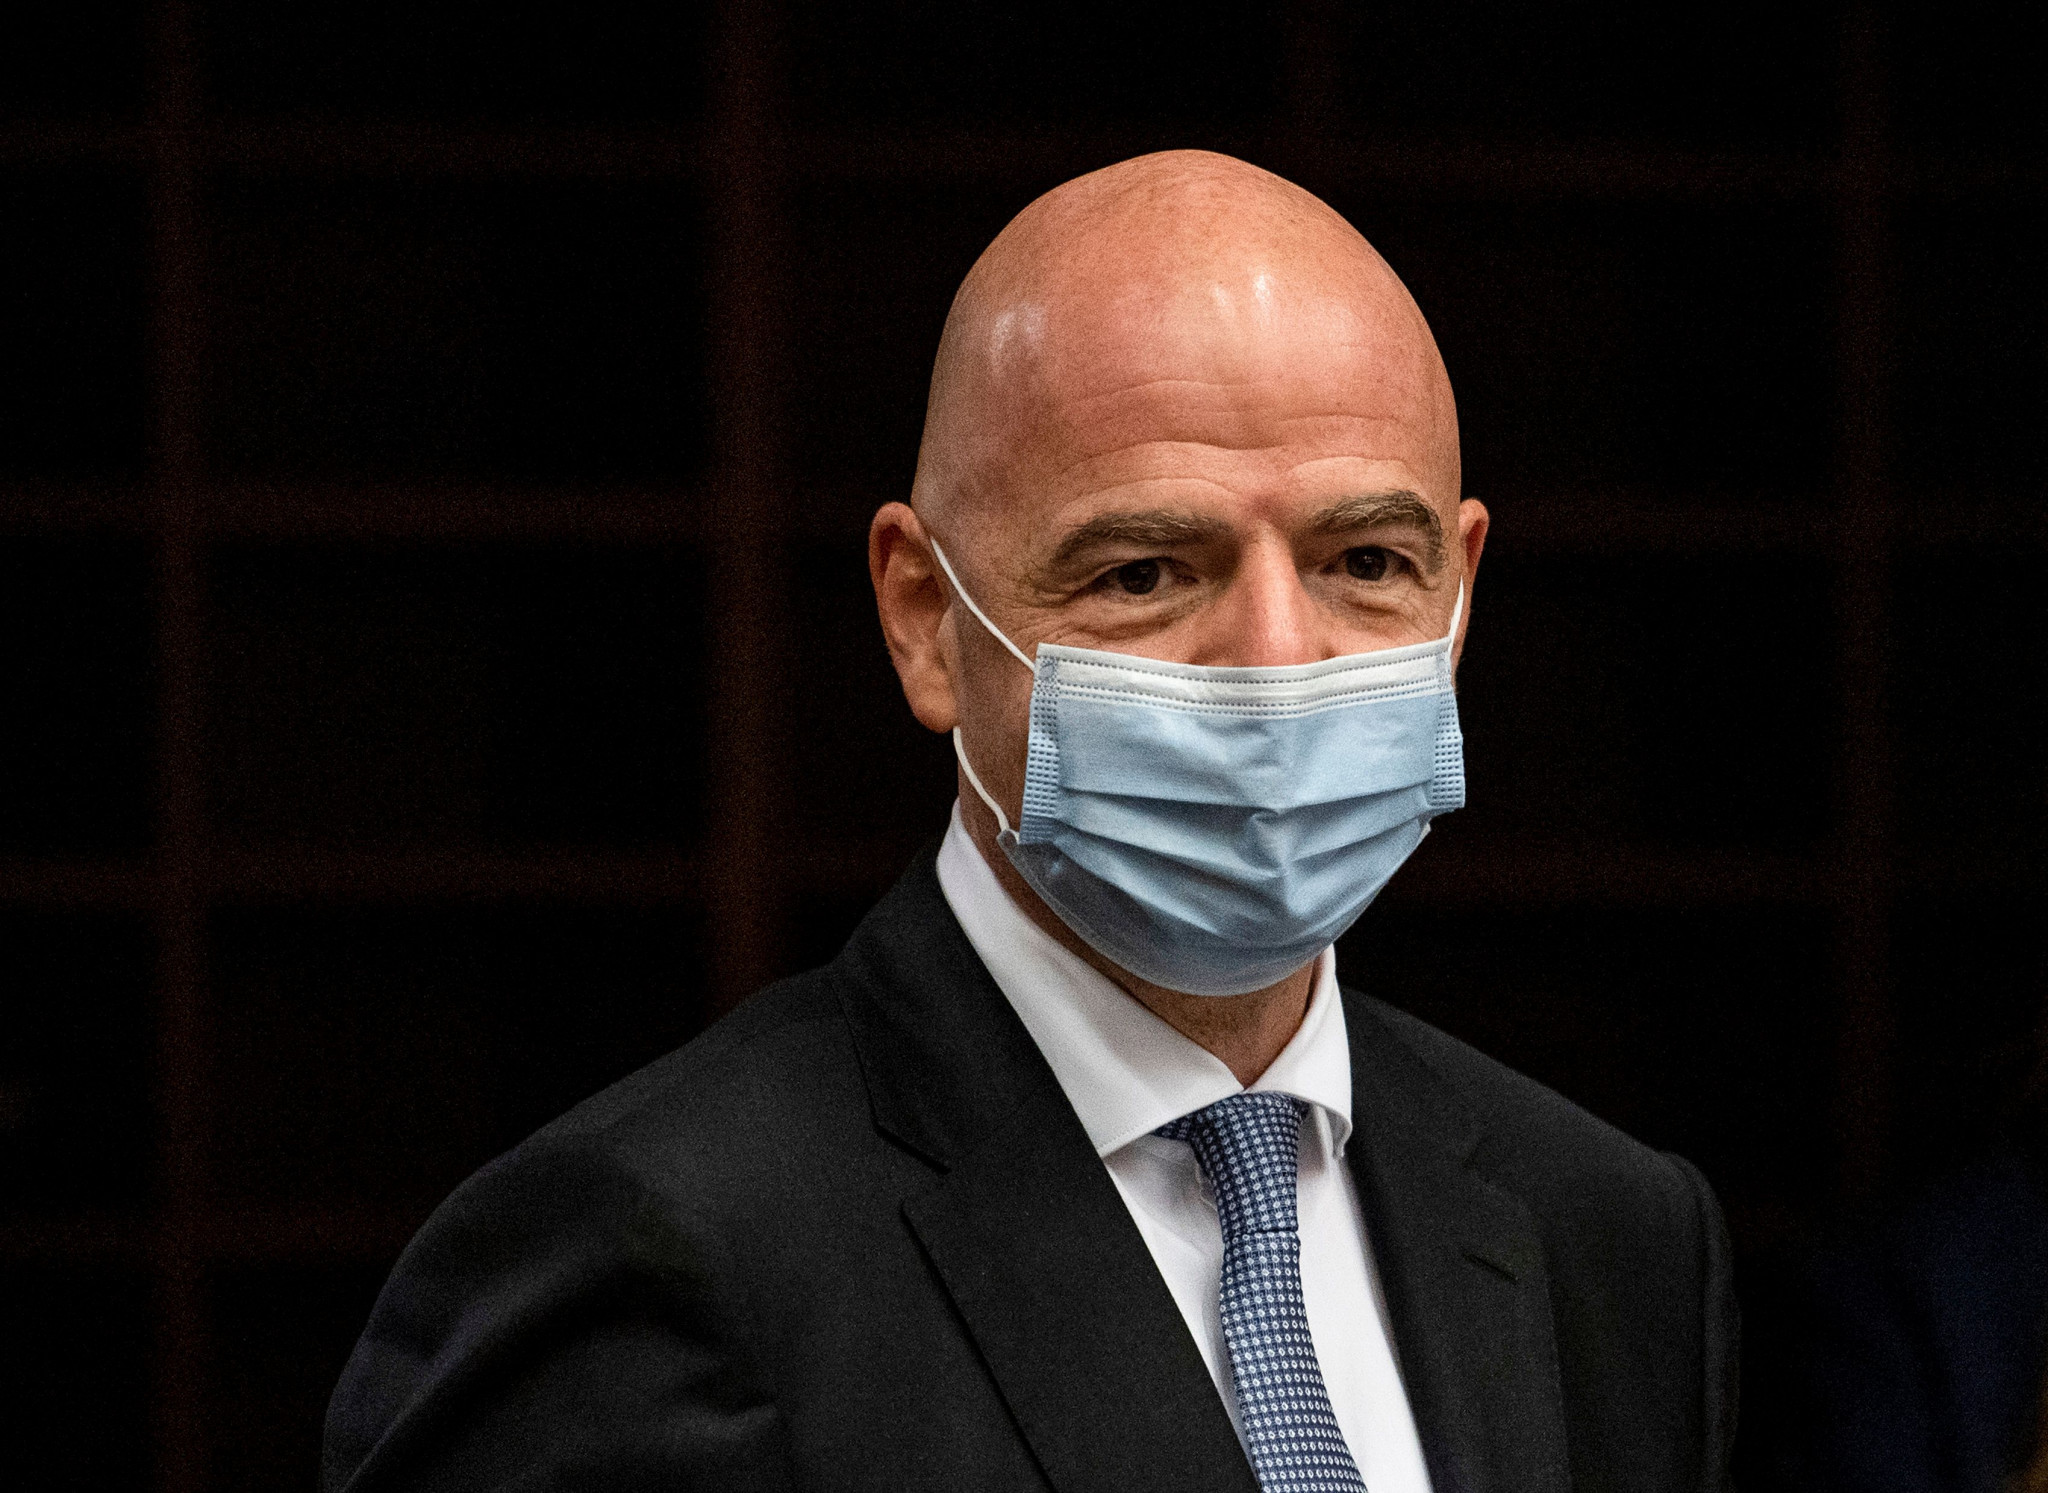 FIFA President Gianni Infantino has tested positive for COVID-19 ©Getty Images